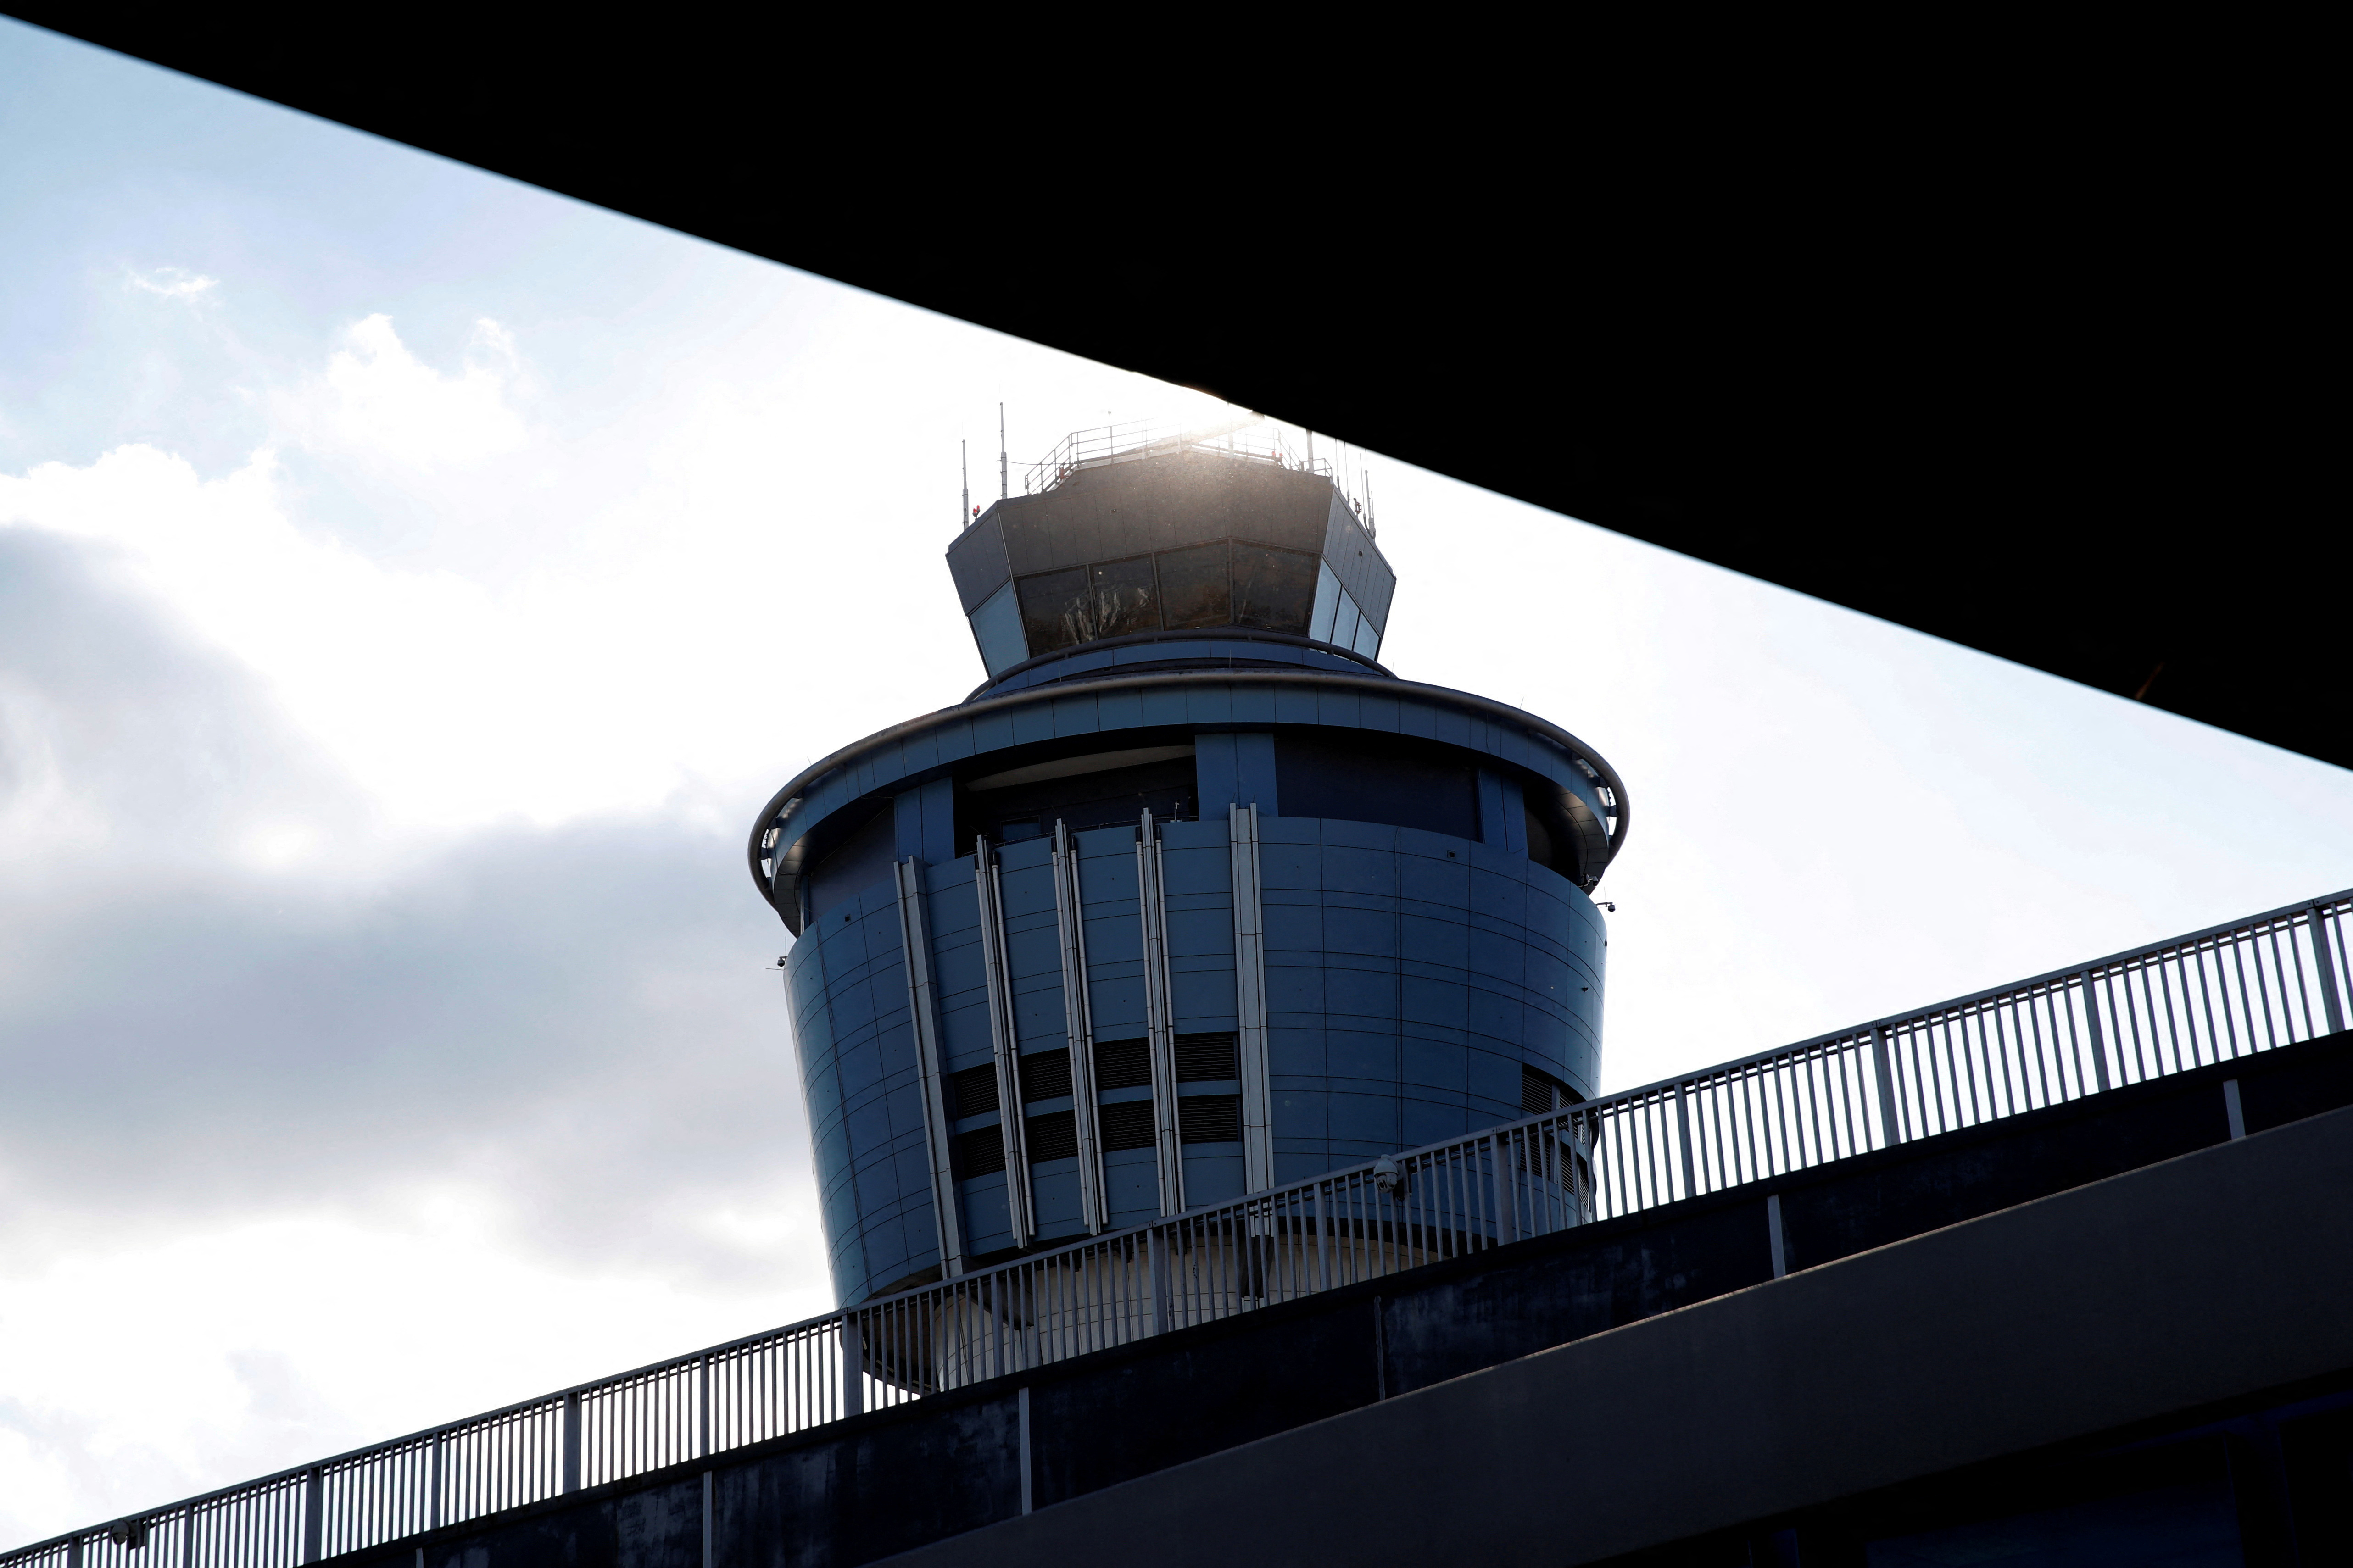 The control tower at LaGuardia Airport in New York City is seen after after hundreds of flights were delayed or grounded in New York